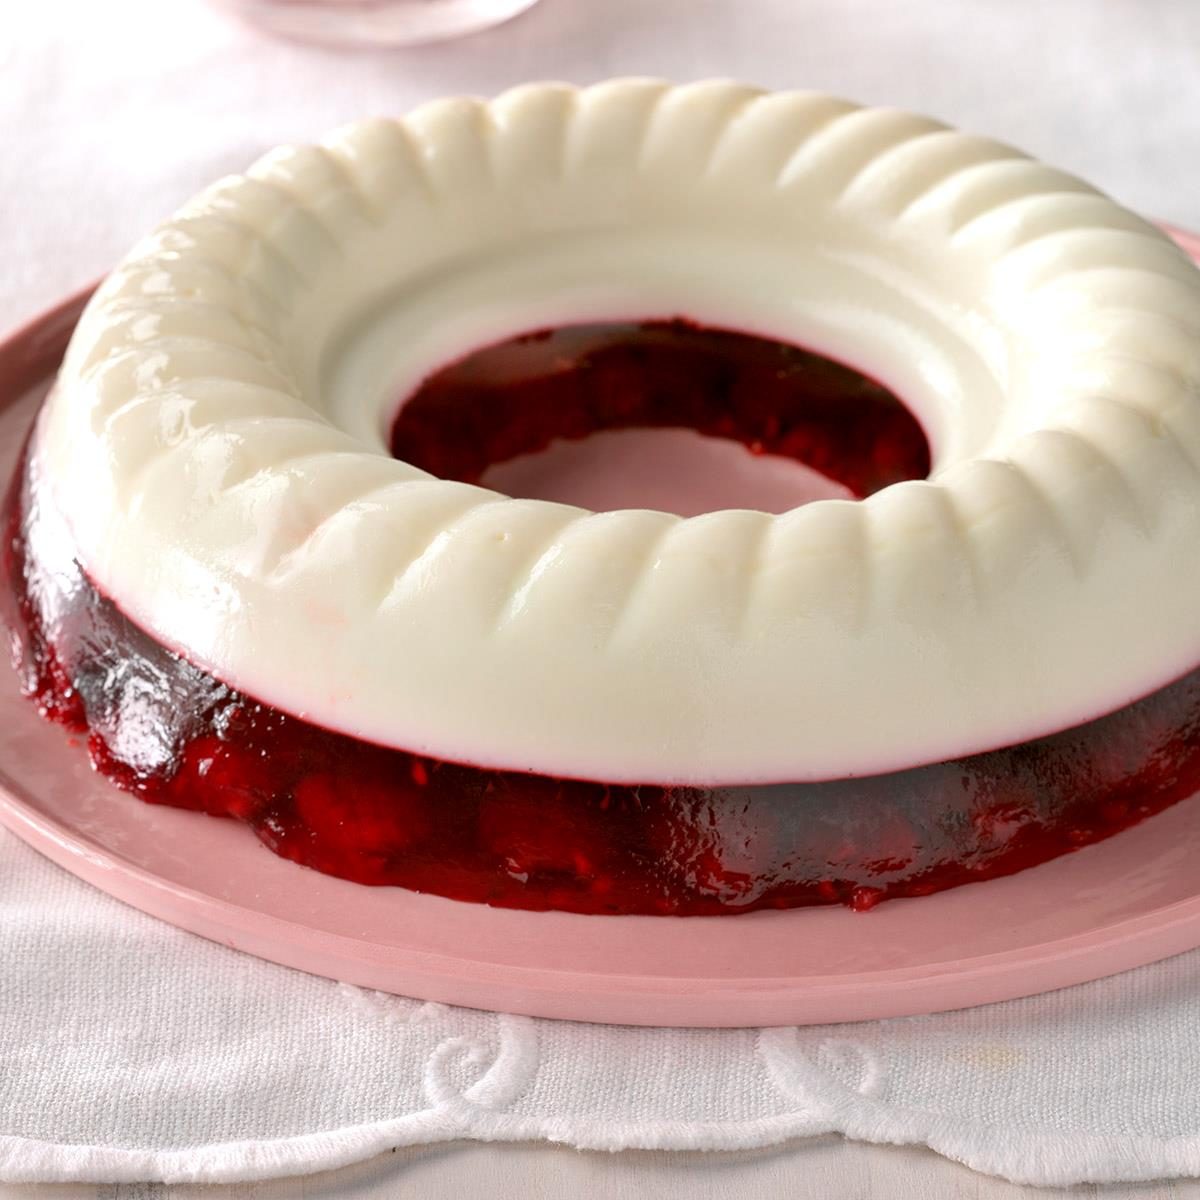 Jel Party Multilayer Dessert and Dip Mold